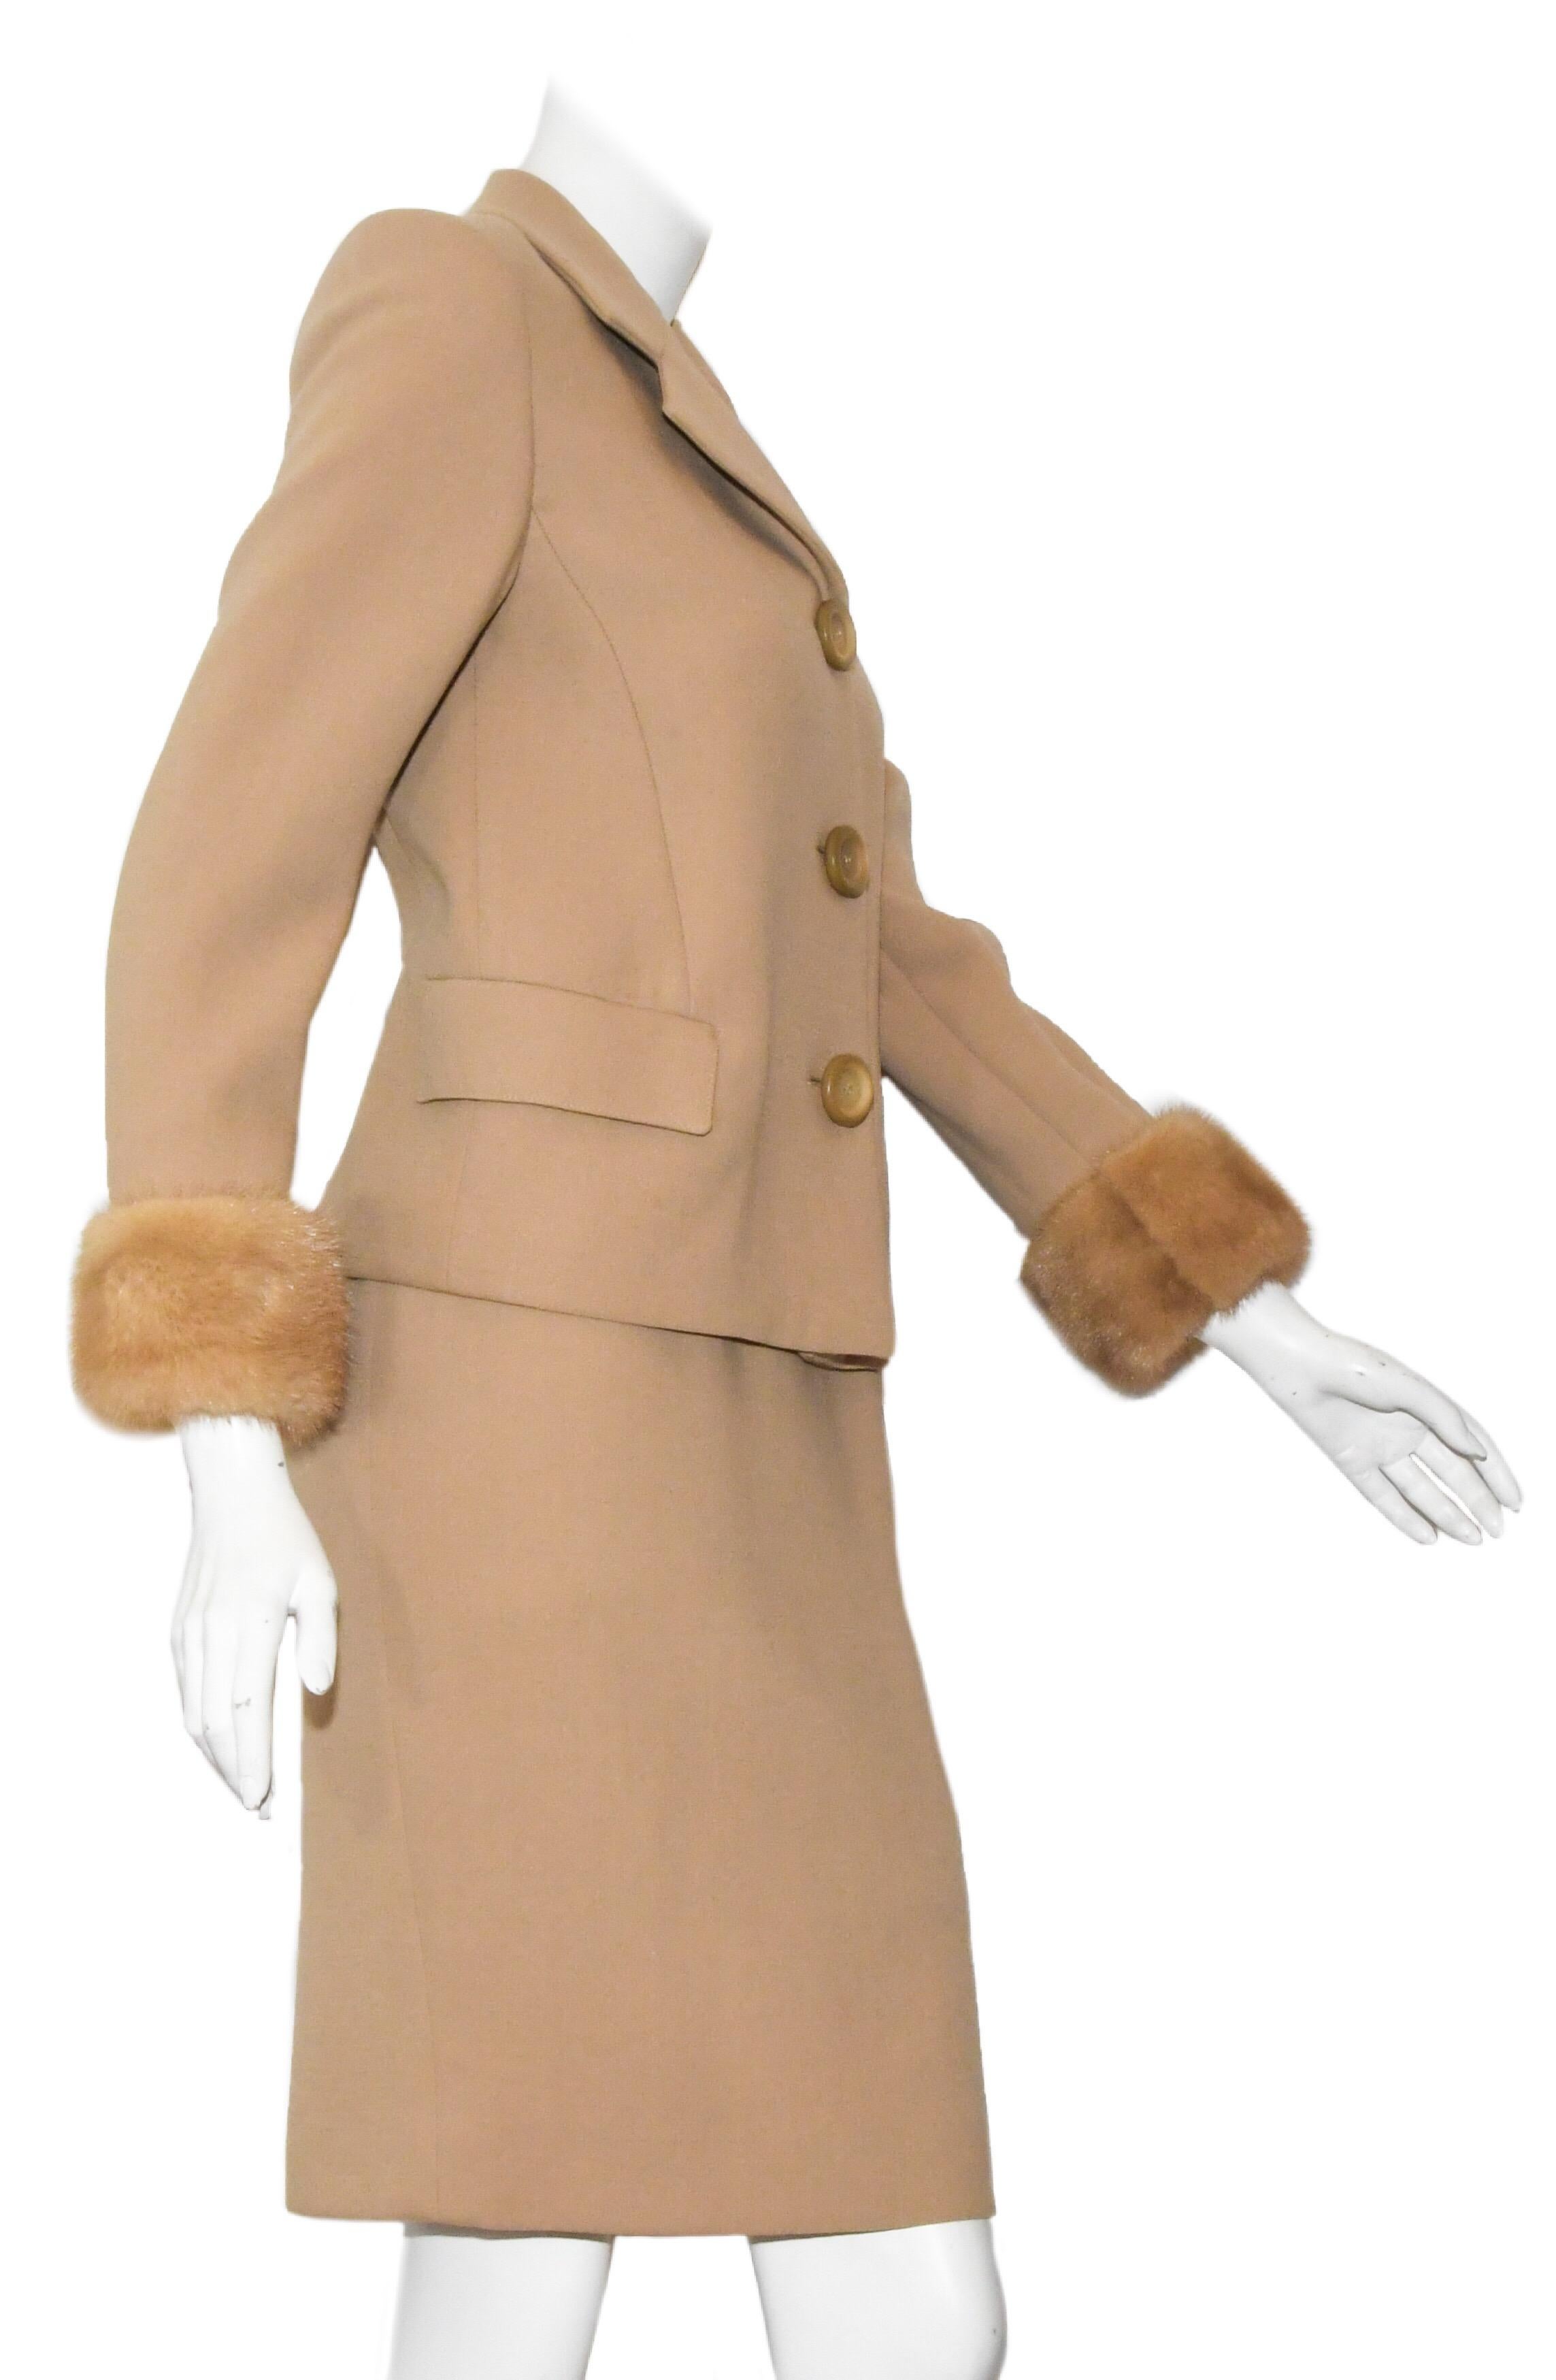 This stunning mid-weight wool suit is Genny at it's best!  This beautiful, warm beige skirt suit is perfect for any occasion.  With a classic jacket with a notched collar and two flap pockets, the whimsy of three large buttons for closure is